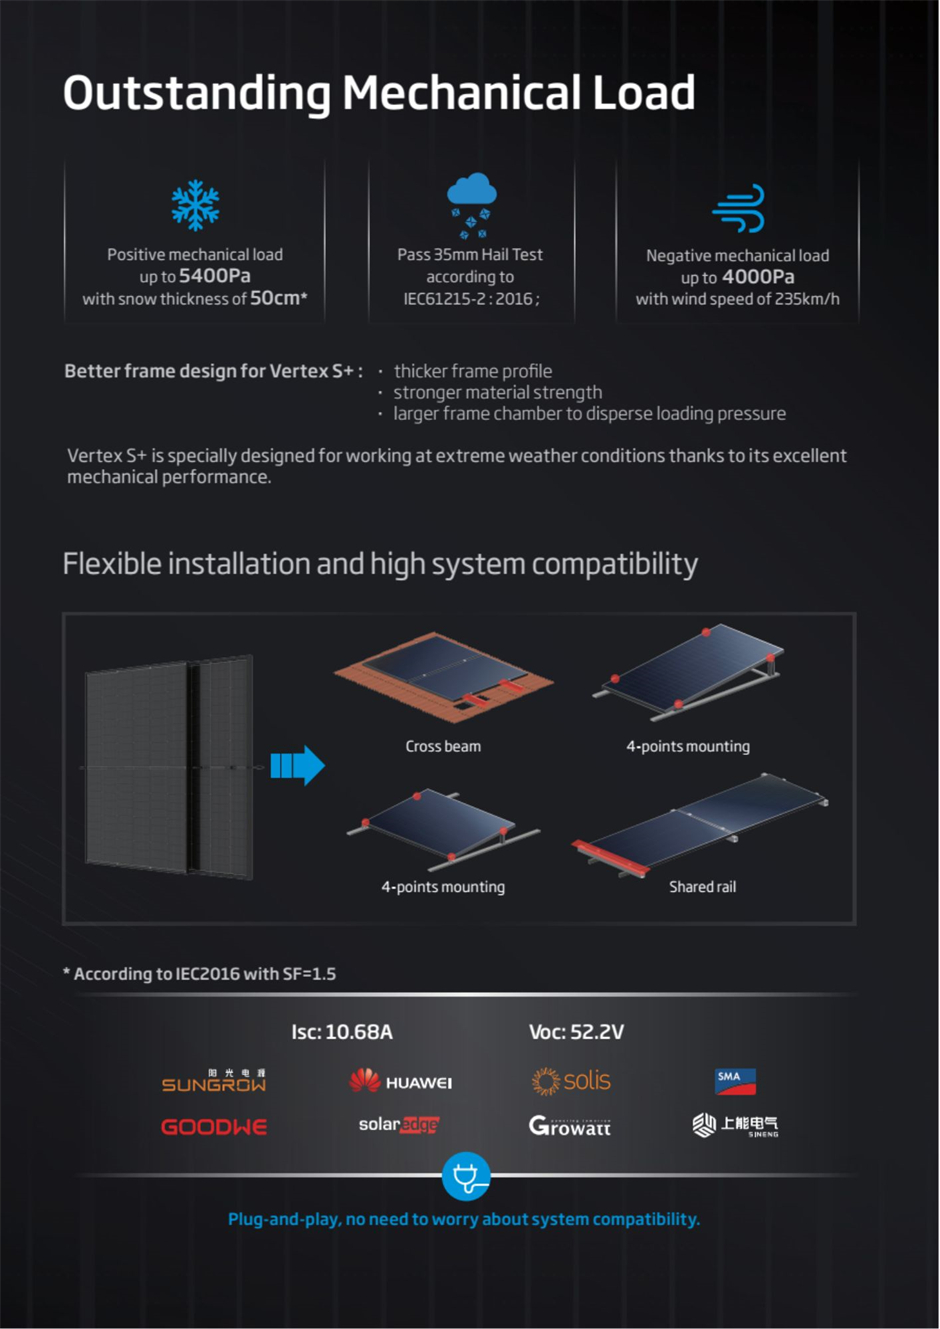 The Vertex S+ Clear Black solar module also comes with outstanding mechanical load, flexible installation, high system compatibility, and a plug-and-play design.